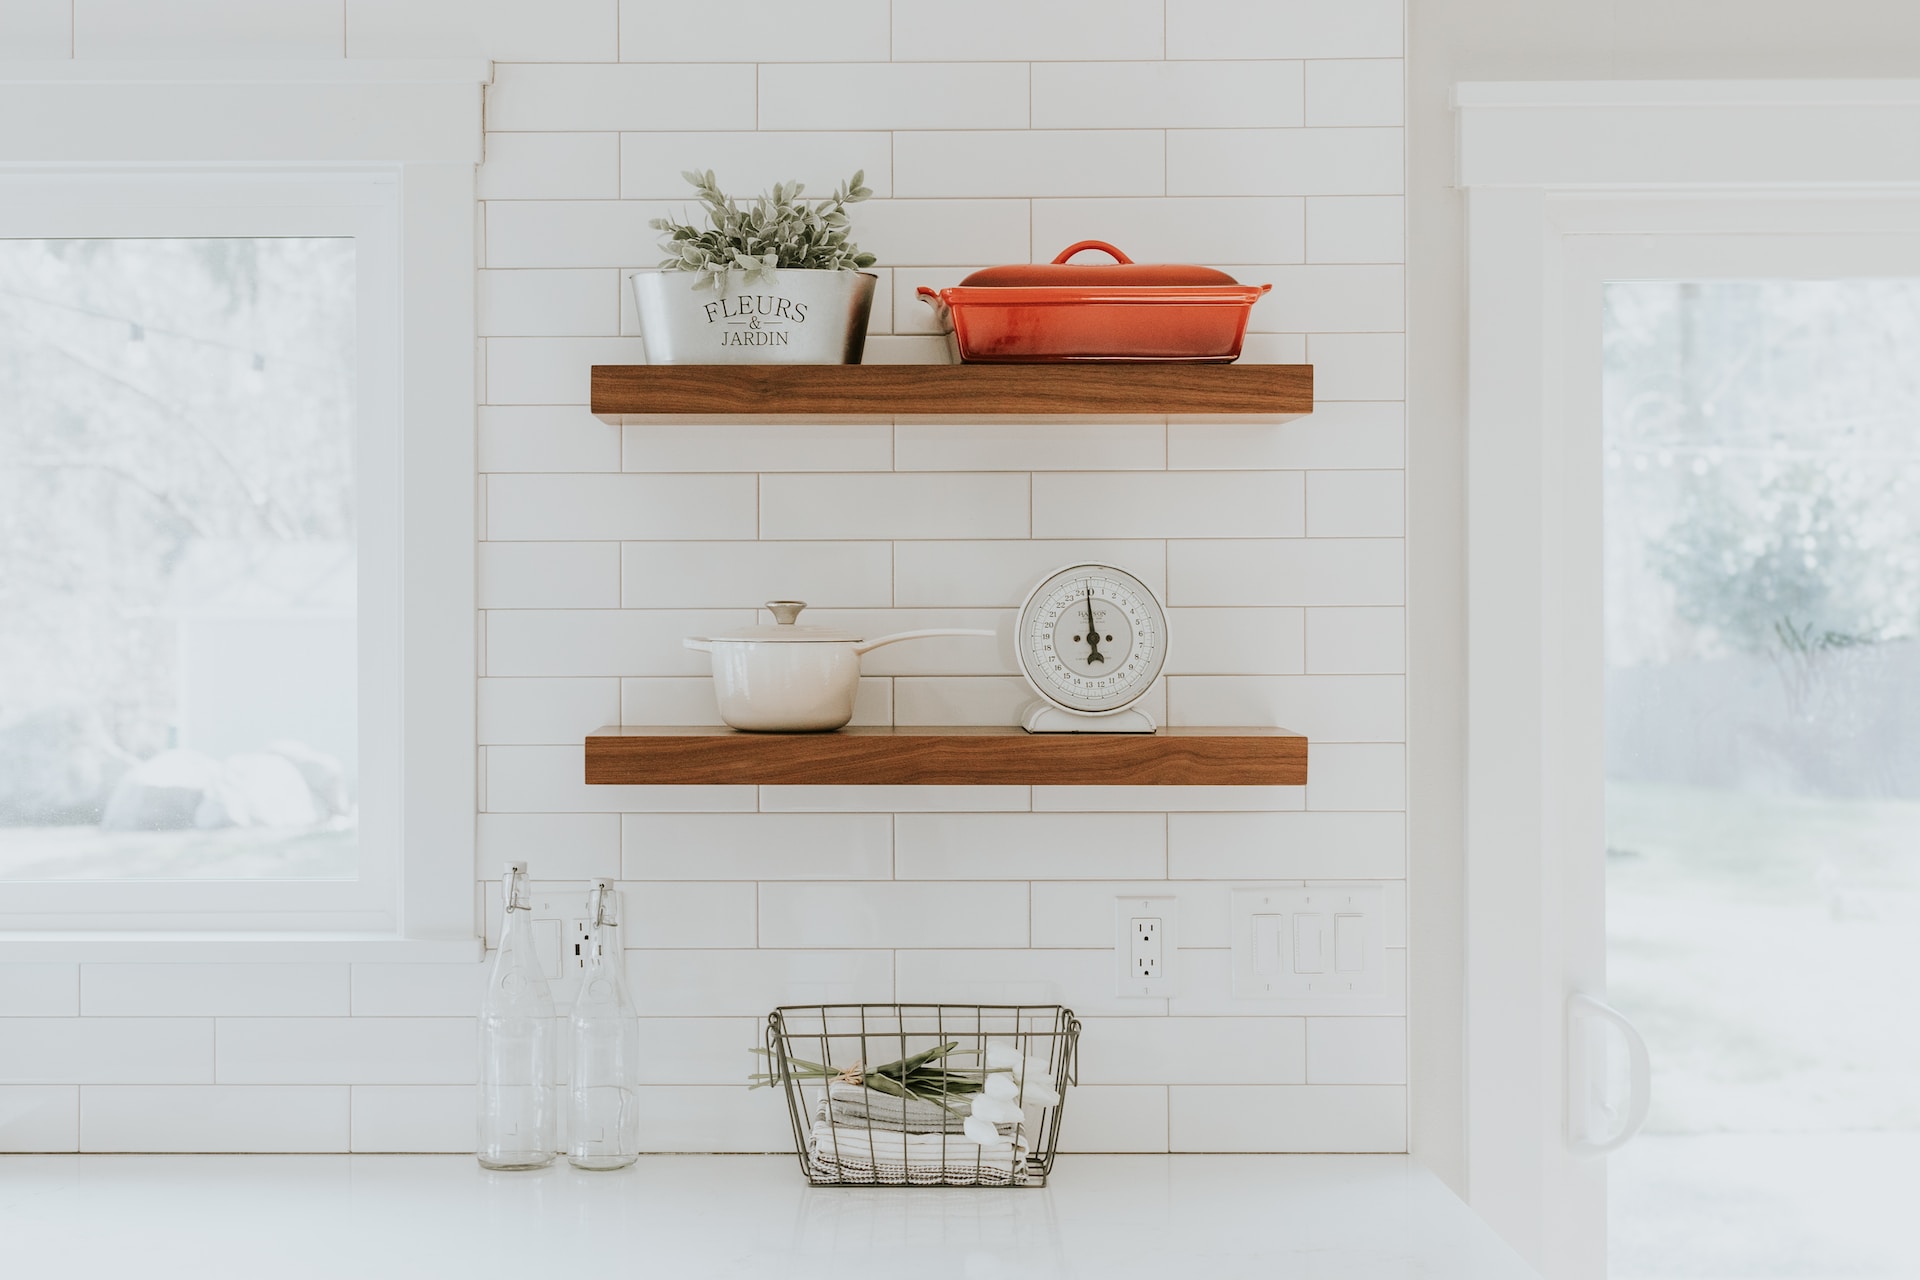 Floating shelves in the kitchen